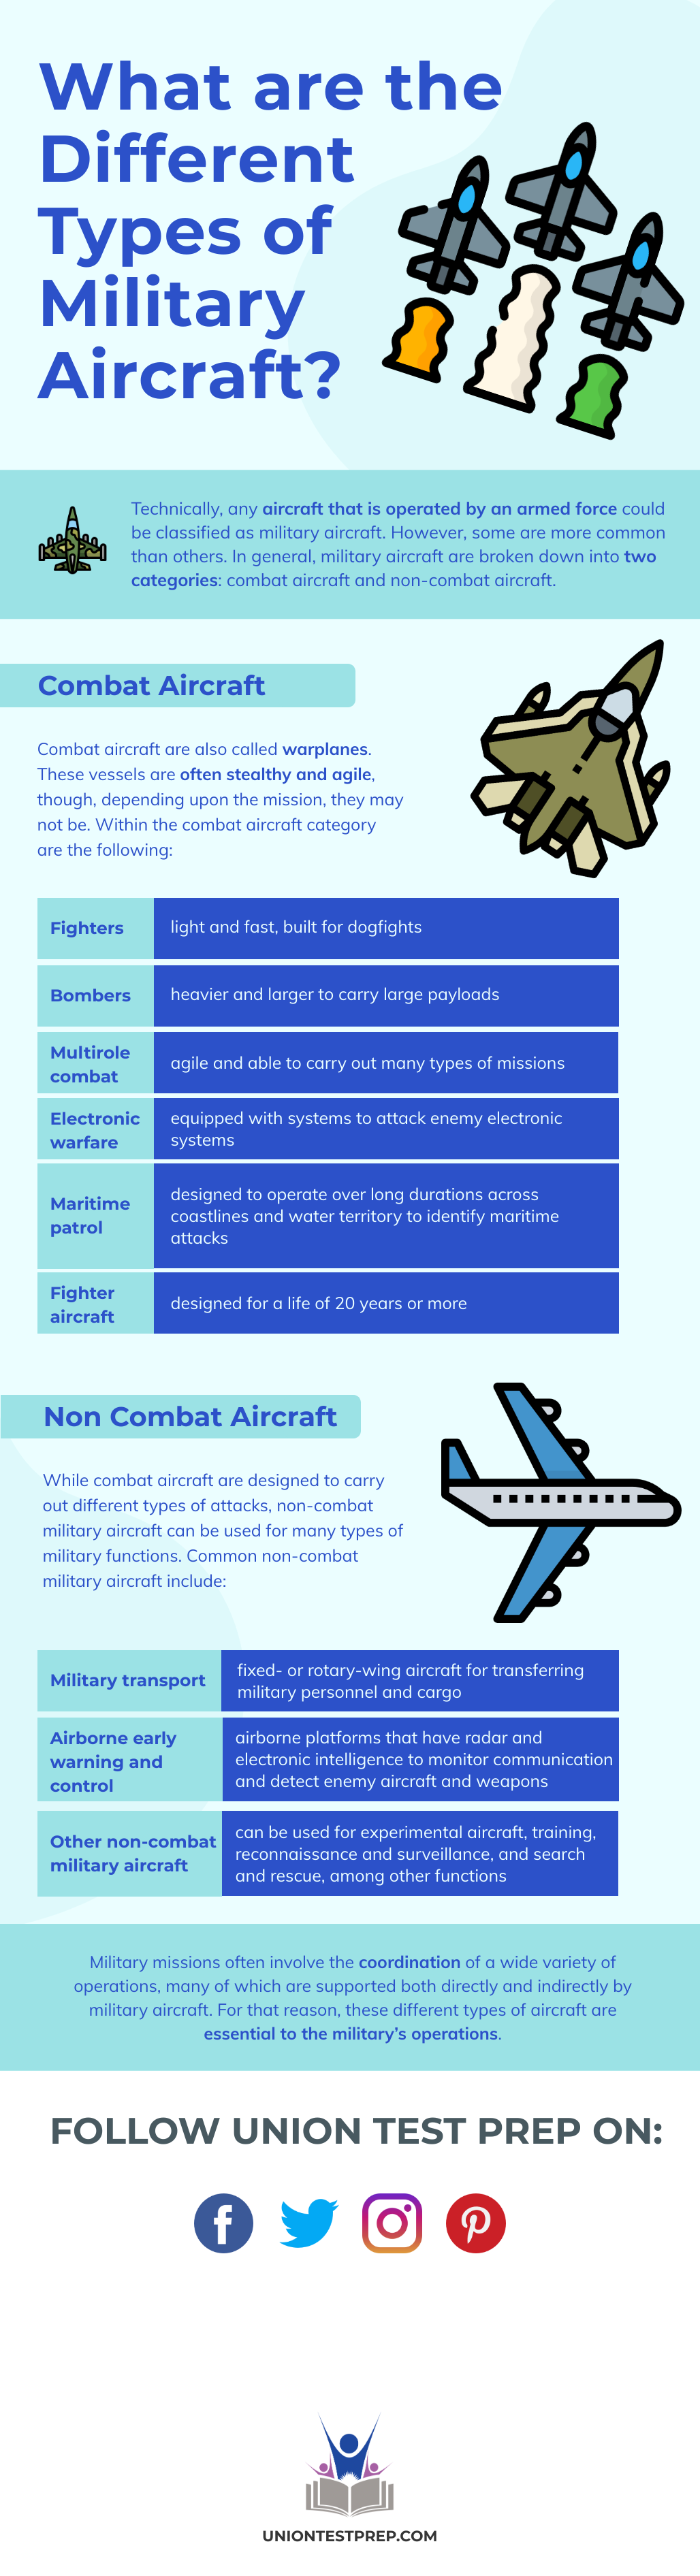 What are the Different Types of Military Aircraft?